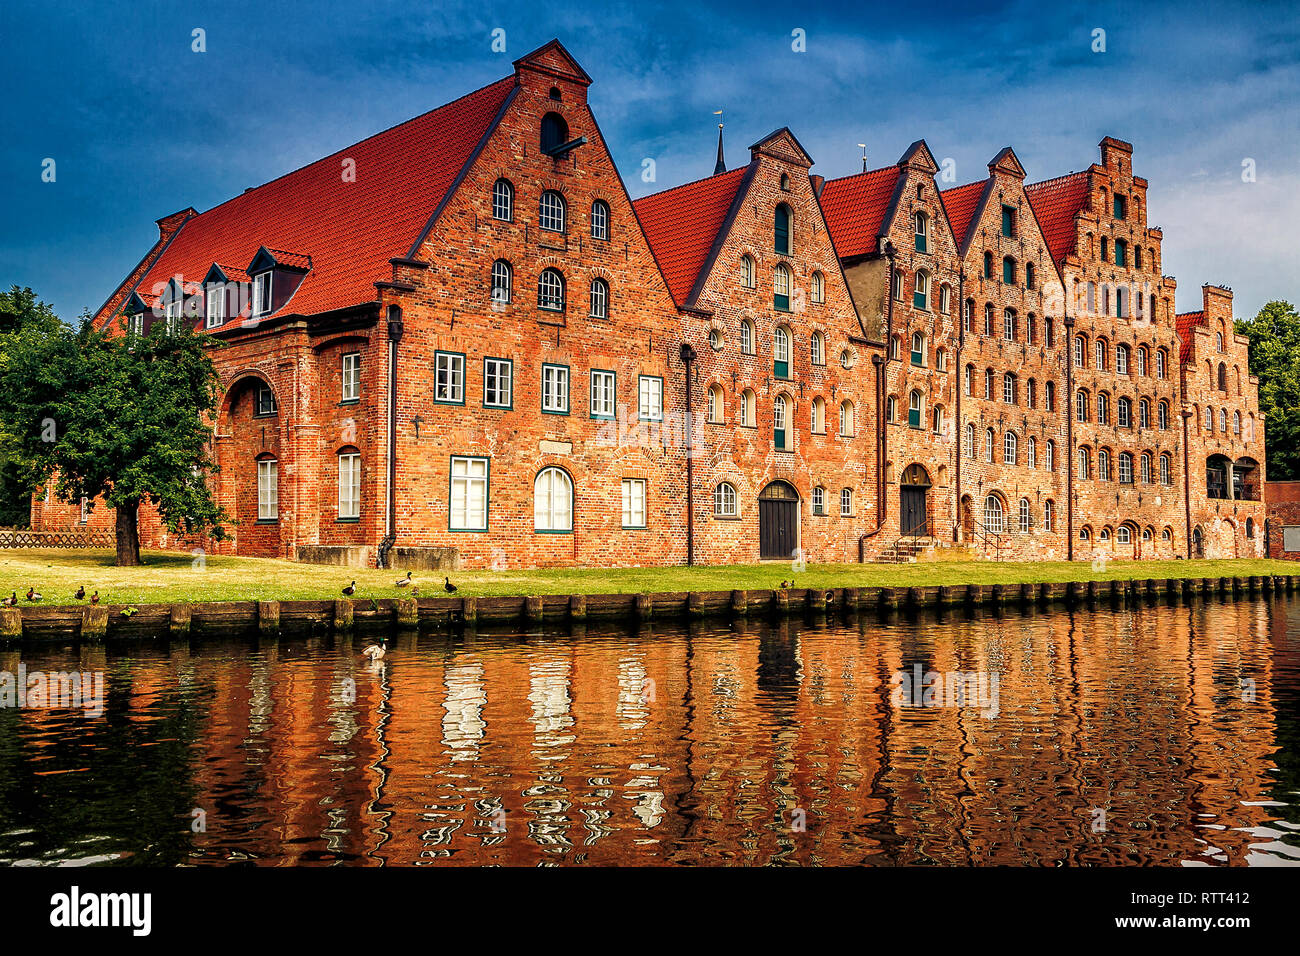 The Salzspeicher (salt storehouses), six historic brick buildings on the Upper Trave River in Luebeck, Schleswig-Holstein, northern Germany. Stock Photo